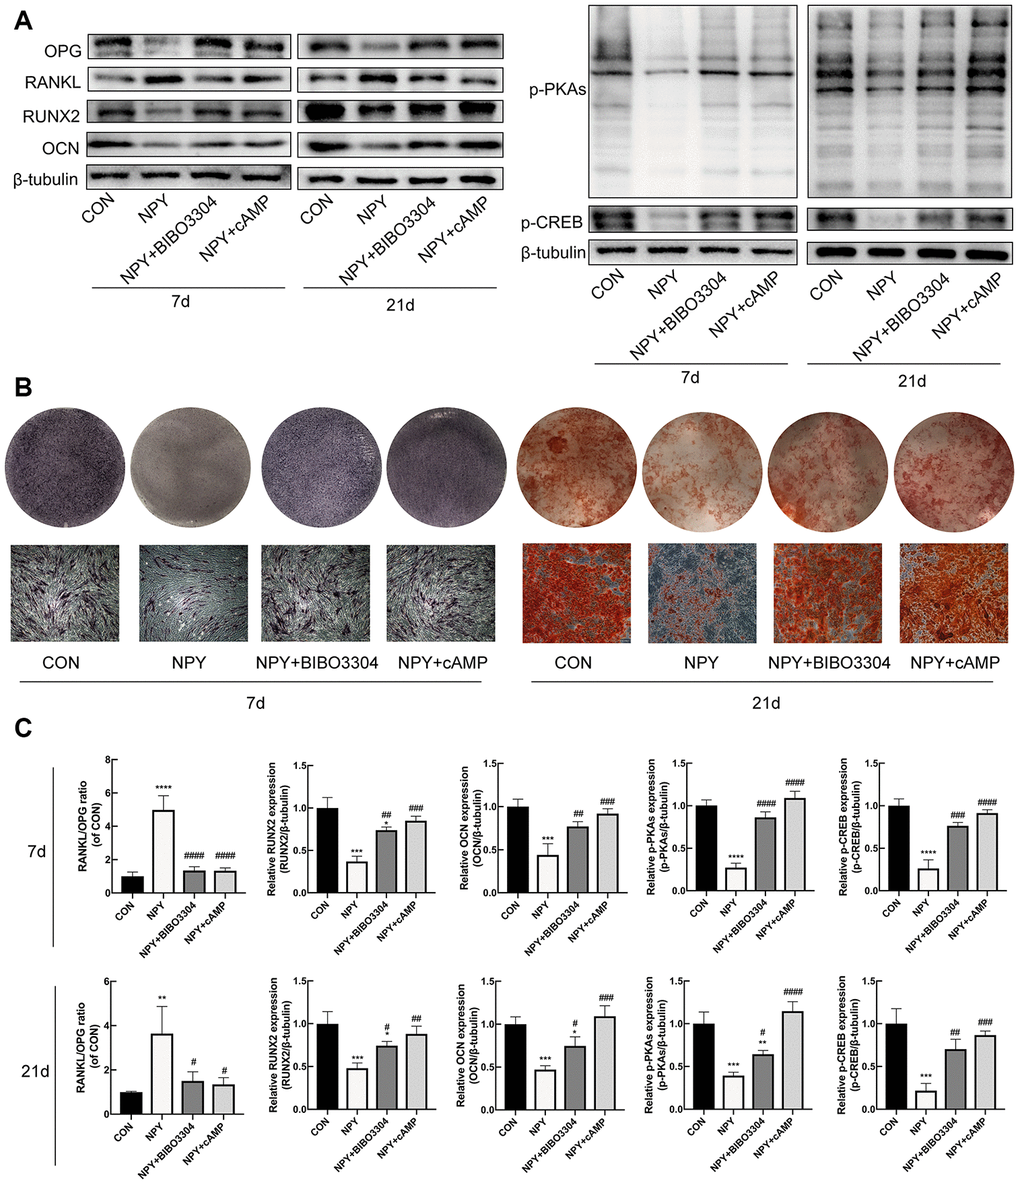 NPY inhibited osteogenesis and elevated RANKL/OPG ratio through Y1R via suppression of cAMP/PKA/CREB pathway in BMSCs. (A, C) Western blotting results of OPG, RANKL, RUNX2, OCN, p-PKAs and p-CREB expression in BMSCs after day 7 and 21 of incubation in osteogenic medium with NPY, NPY+BIBO3304 or NPY+cAMP. (B) ALP staining on day 7, and Alizarin red S staining of BMSCs on day 21 of incubation in osteogenic medium with NPY, NPY+BIBO3304 or NPY+cAMP. The data are expressed as the means ± SD. *P#P##P###P####P